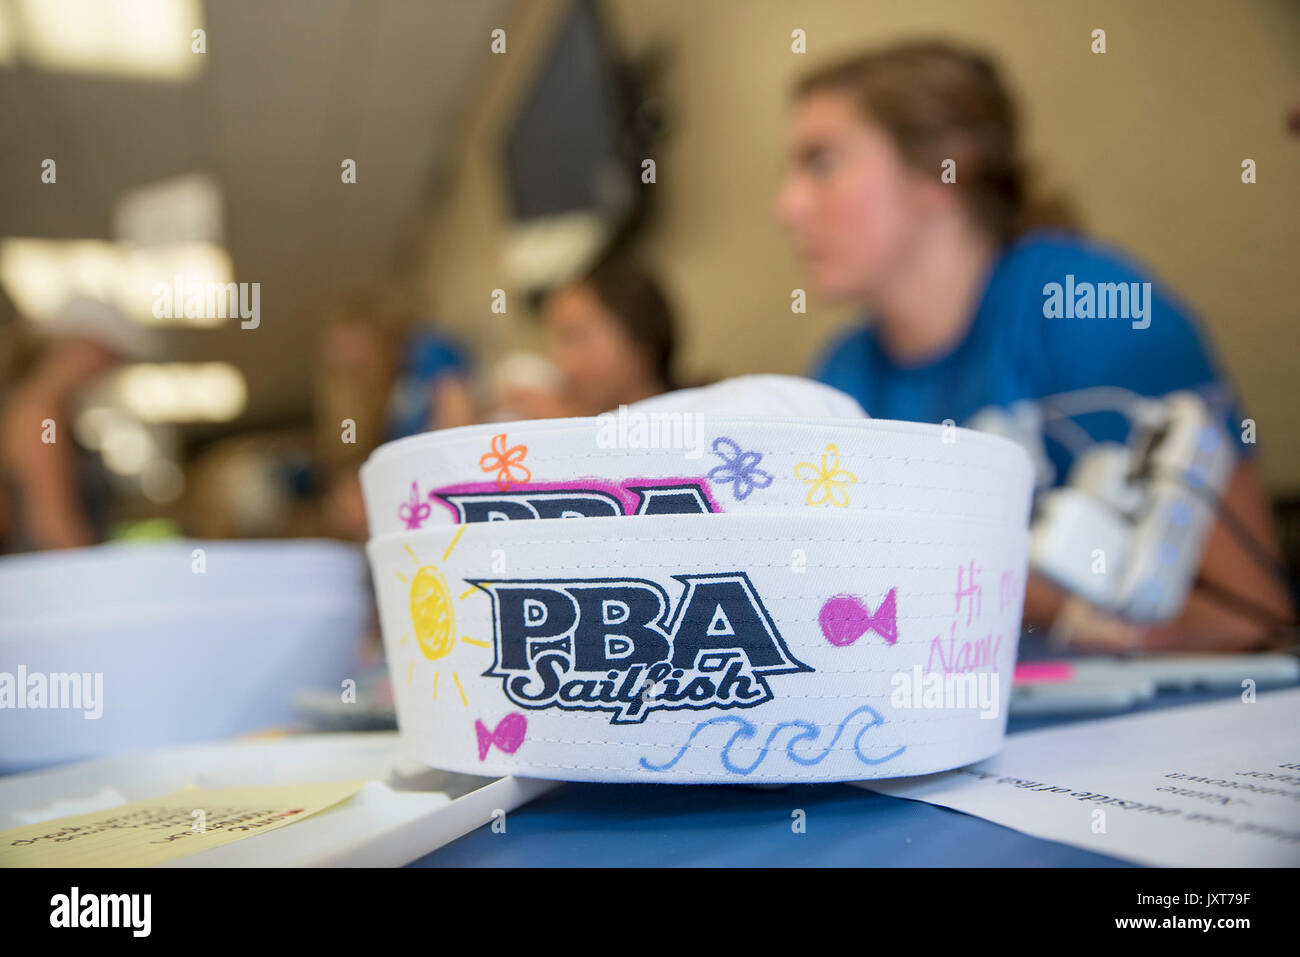 August 17, 2017 - West Palm Beach, Florida, U.S. - A Palm Beach Atlantic University ''fish,'' hat is seen on a table during move-in day at Palm Beach Atlantic University in West Palm Beach, Fla., on Thursday, August 17, 2017. At PBA, incoming freshman traditionally wear the hats, which are decorated with the student's information like age or major, during their first week at school. Of the approximately 740 incoming new students, about 700 will live on-campus in residence halls. (Credit Image: © Andres Leiva/The Palm Beach Post via ZUMA Wire) Stock Photo